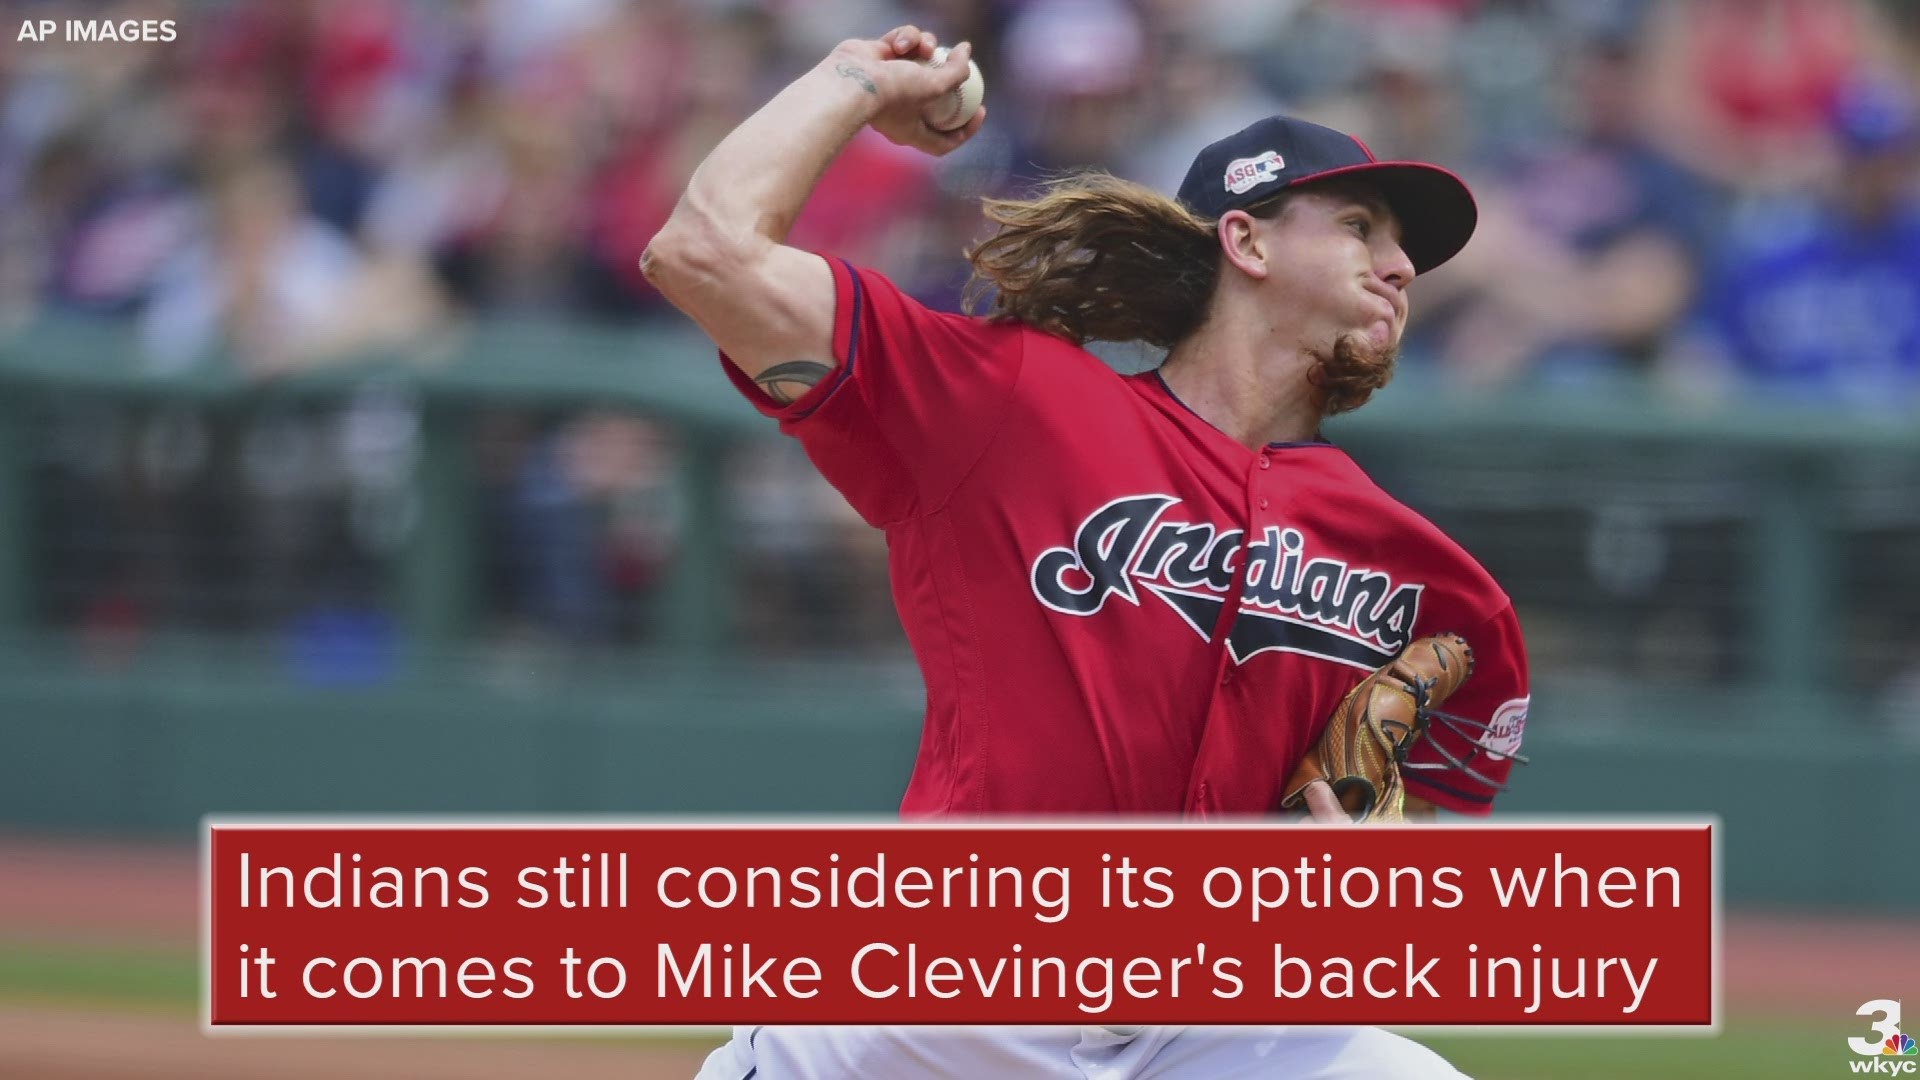 According to Cleveland Indians president Chris Antonetti, the team is still considering its options when it comes to Mike Clevinger's back injury.